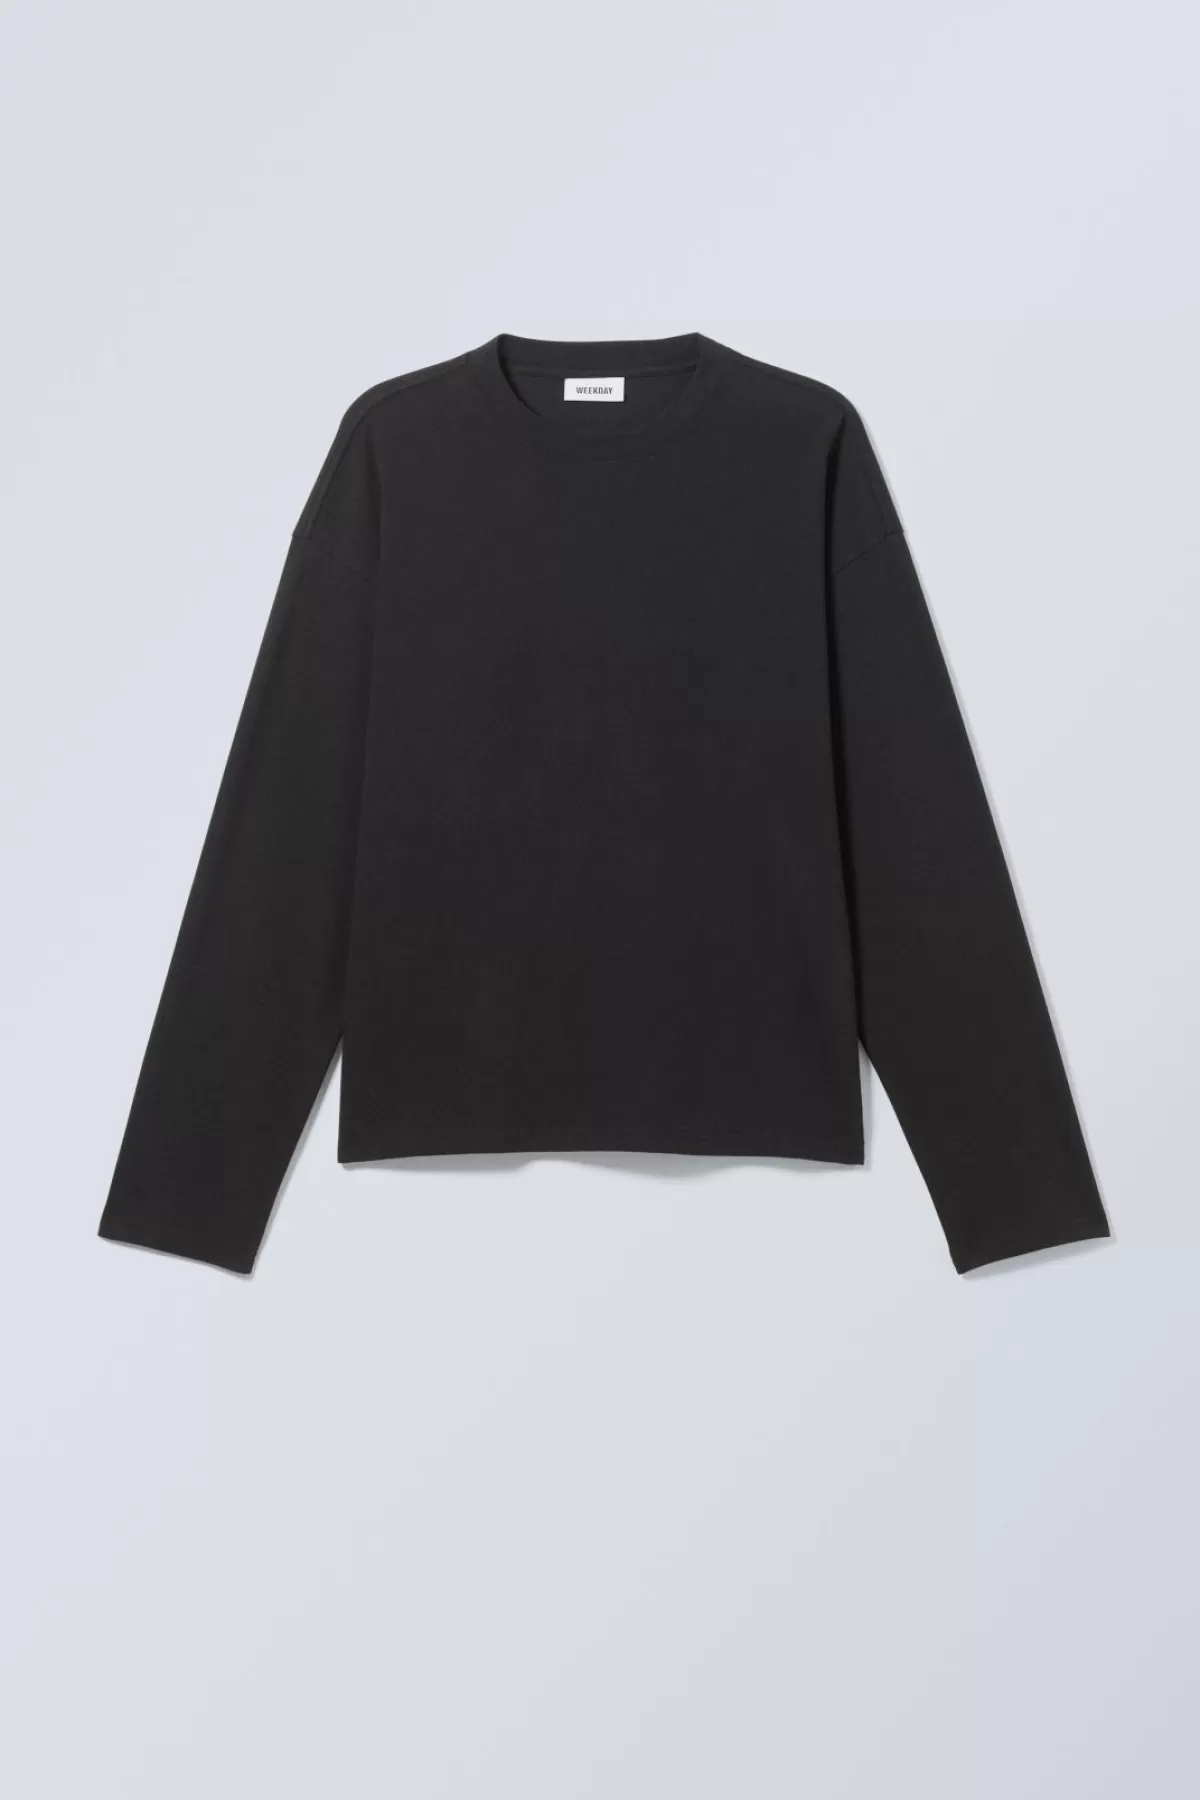 Weekday Great Boxy Long Sleeve T- shirt Best